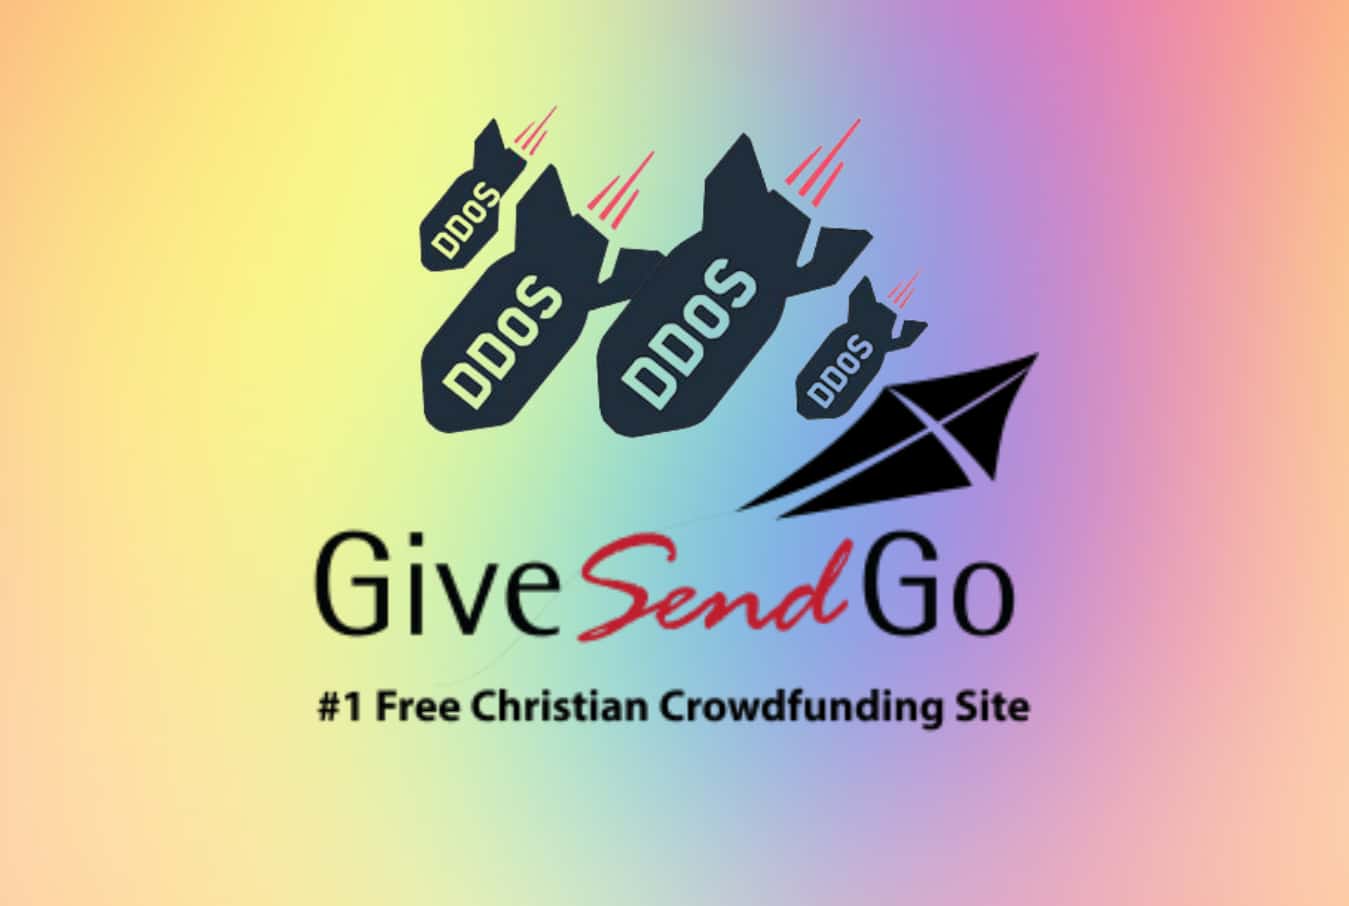 GiveSendGo - Tunnel Rush: The Leader in Freedom Fundraising.